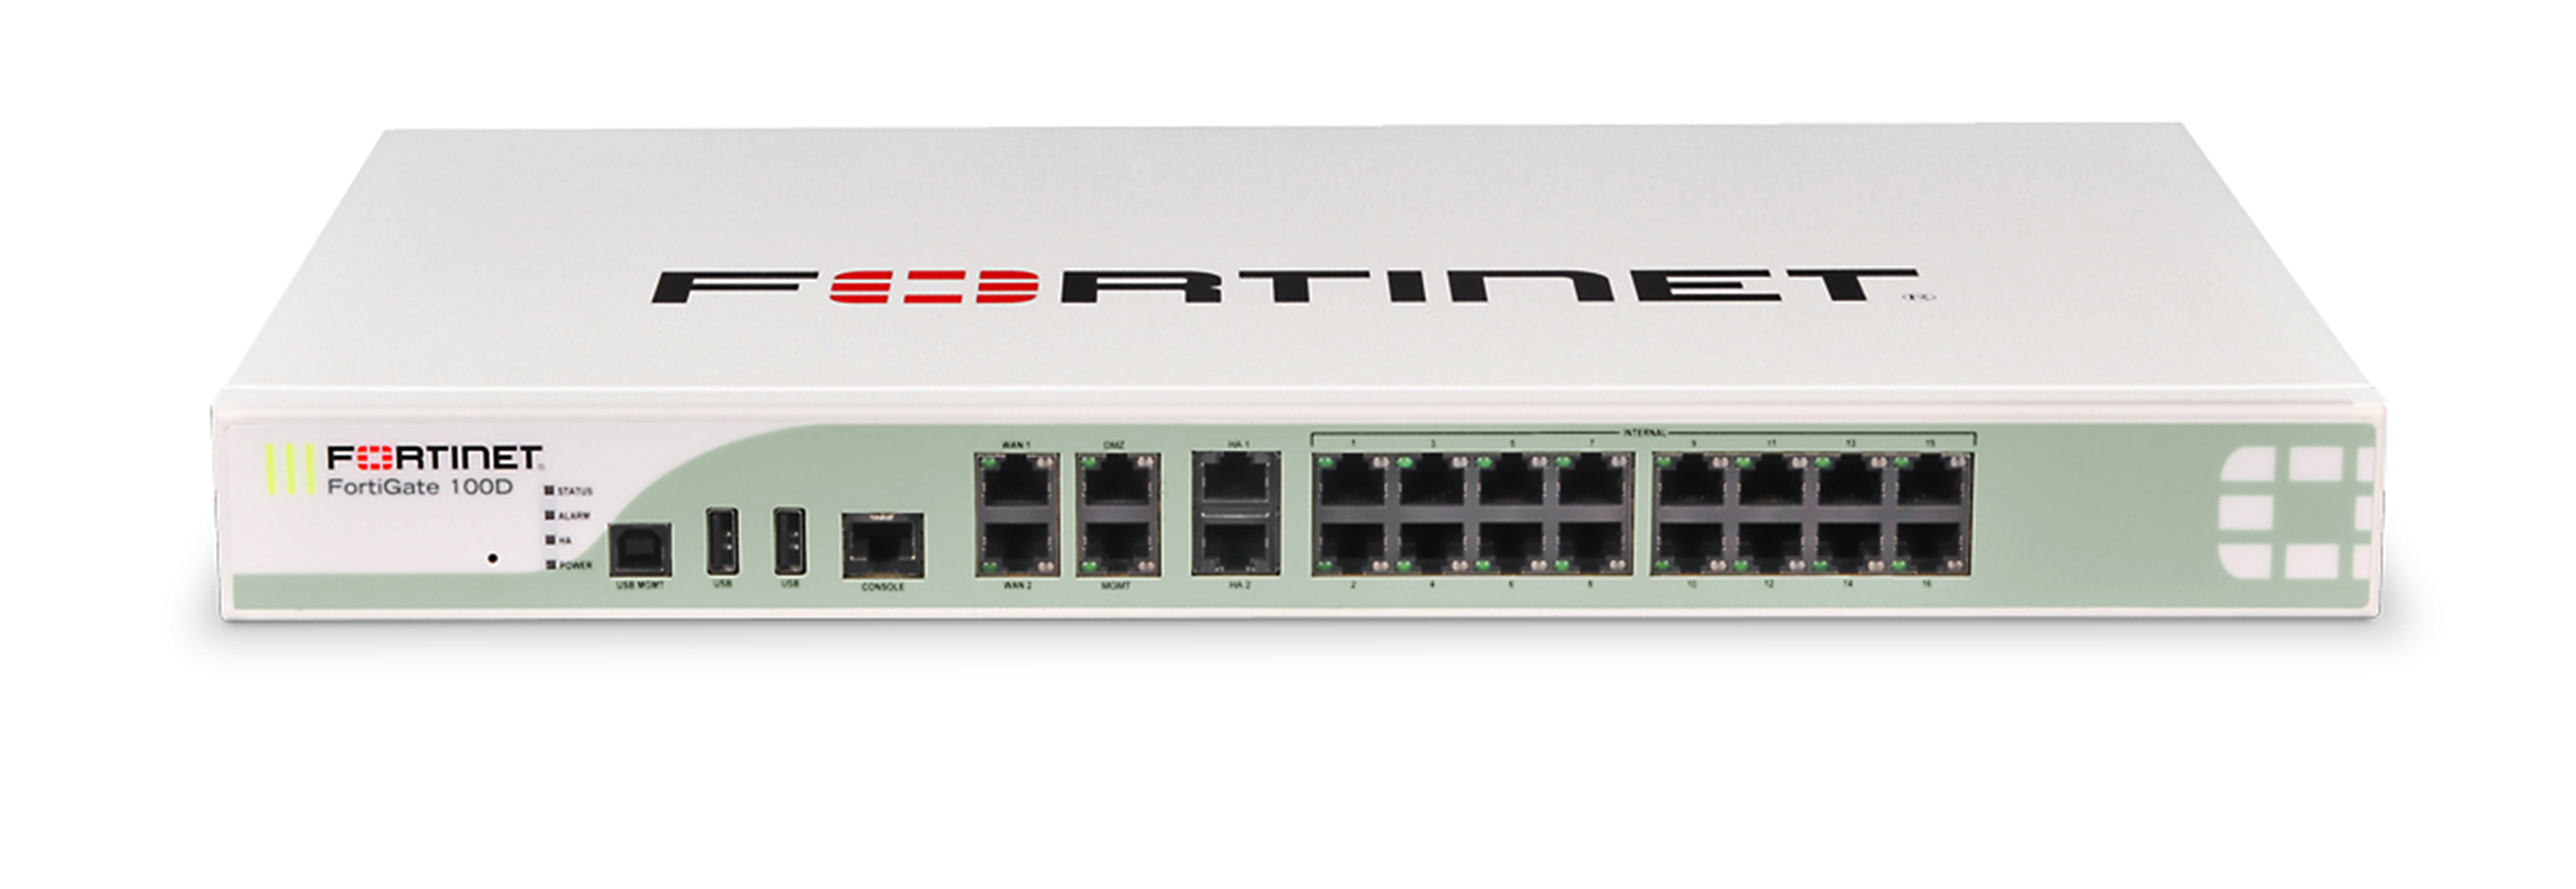 fortinet forticlient